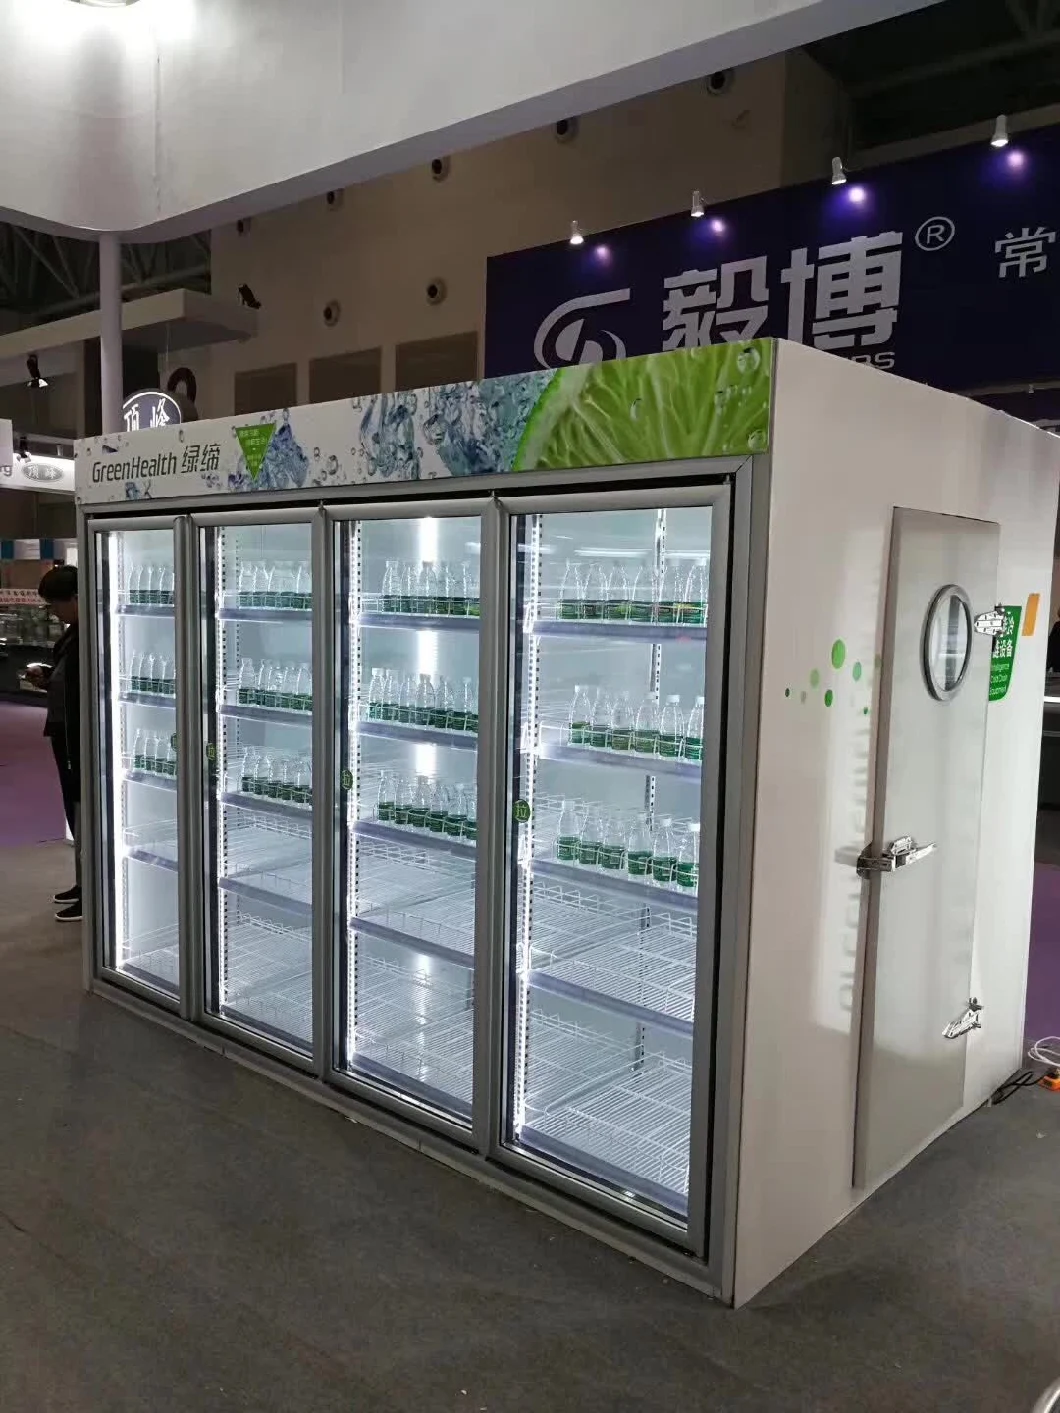 Commercial Vertical Upright Beverage Refrigerated Display Cabinet with Glass Door